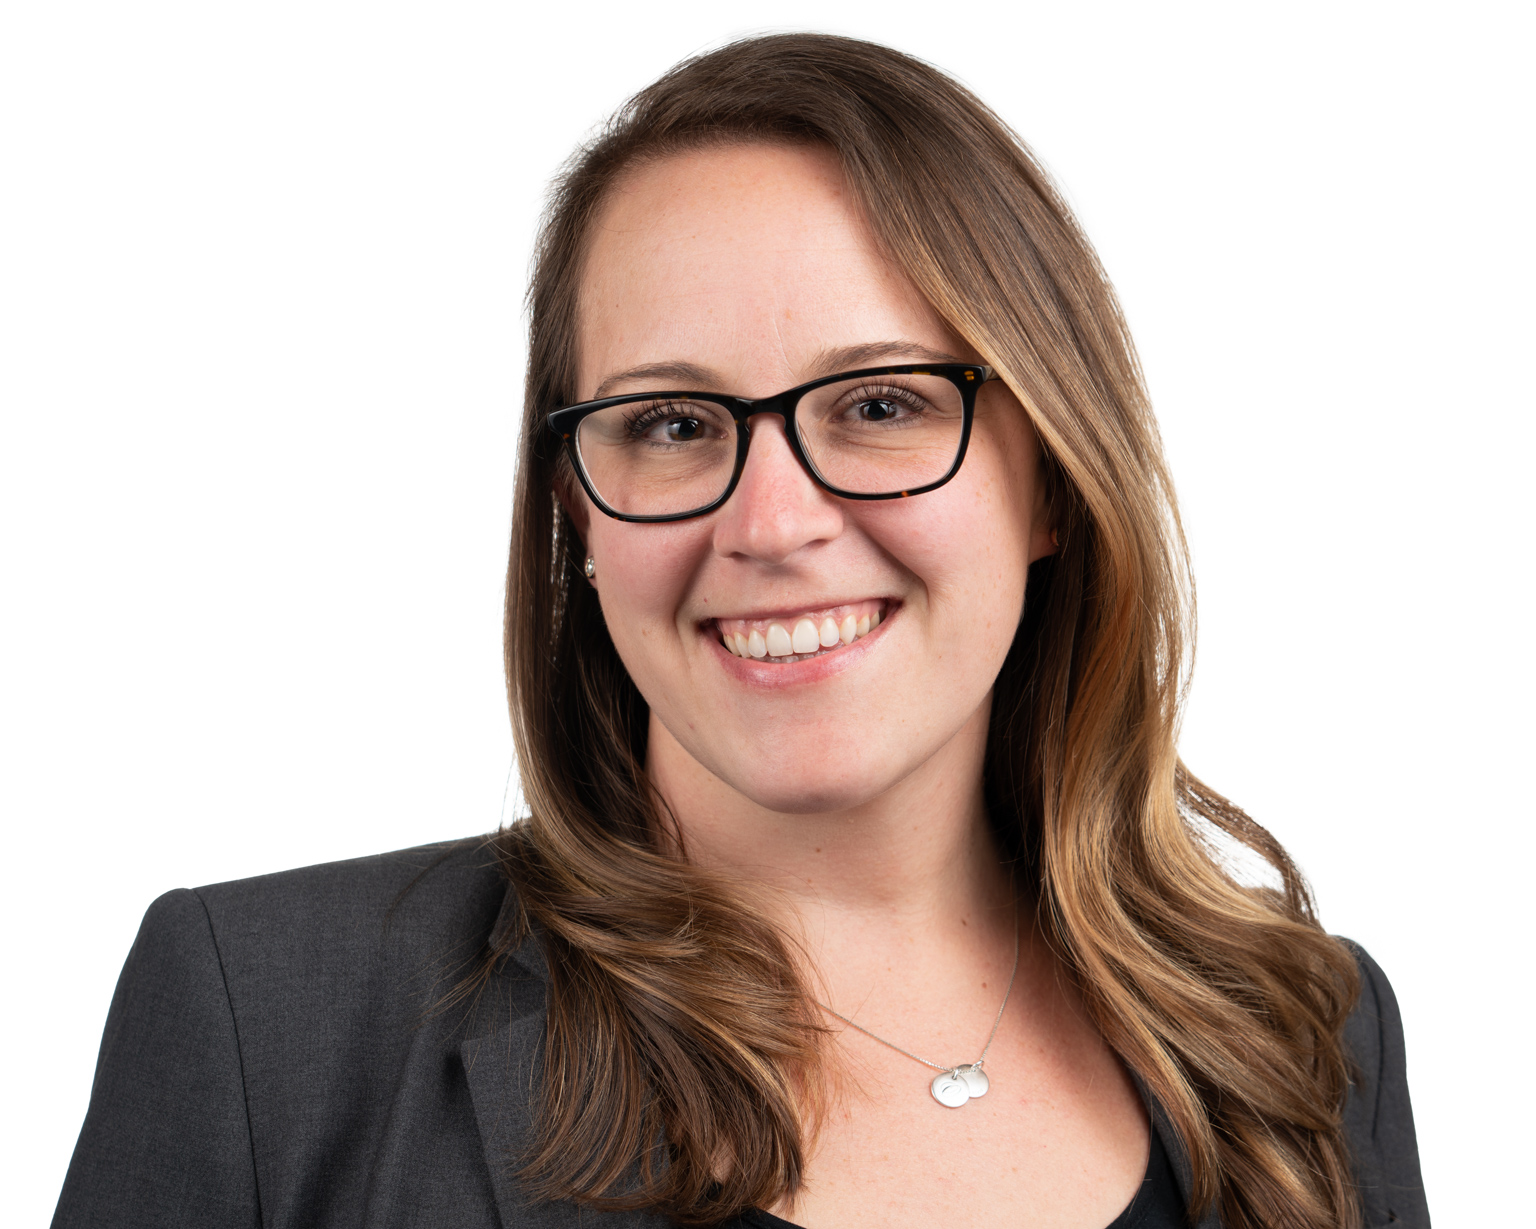 Professional Headshot of a young lady wearing glasses